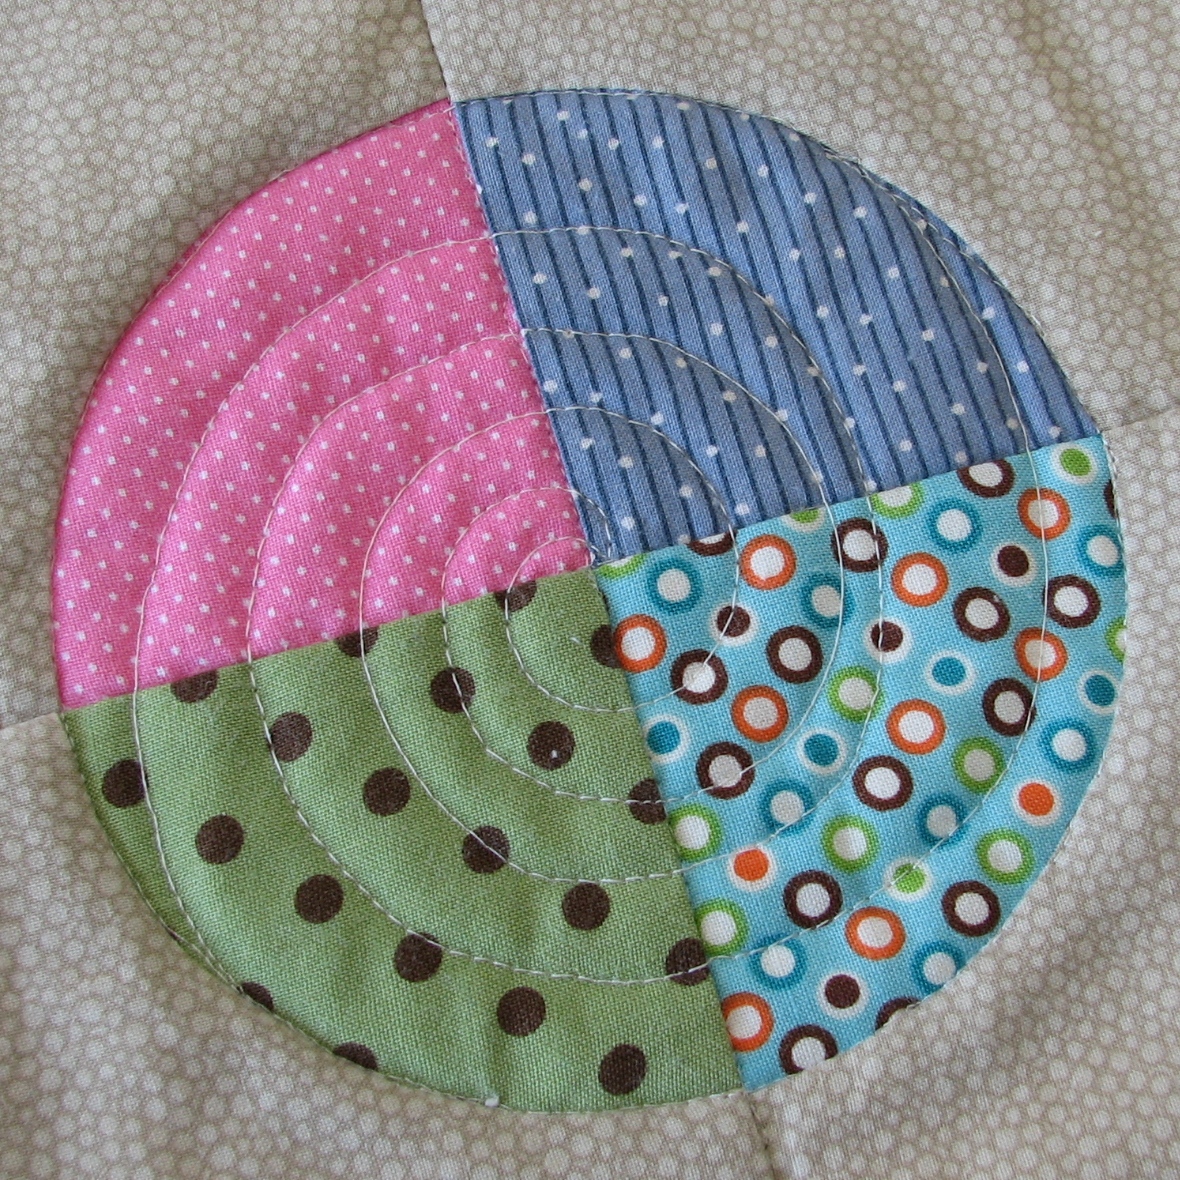 Such a Sew and Sew: Going ‘Round in Circles